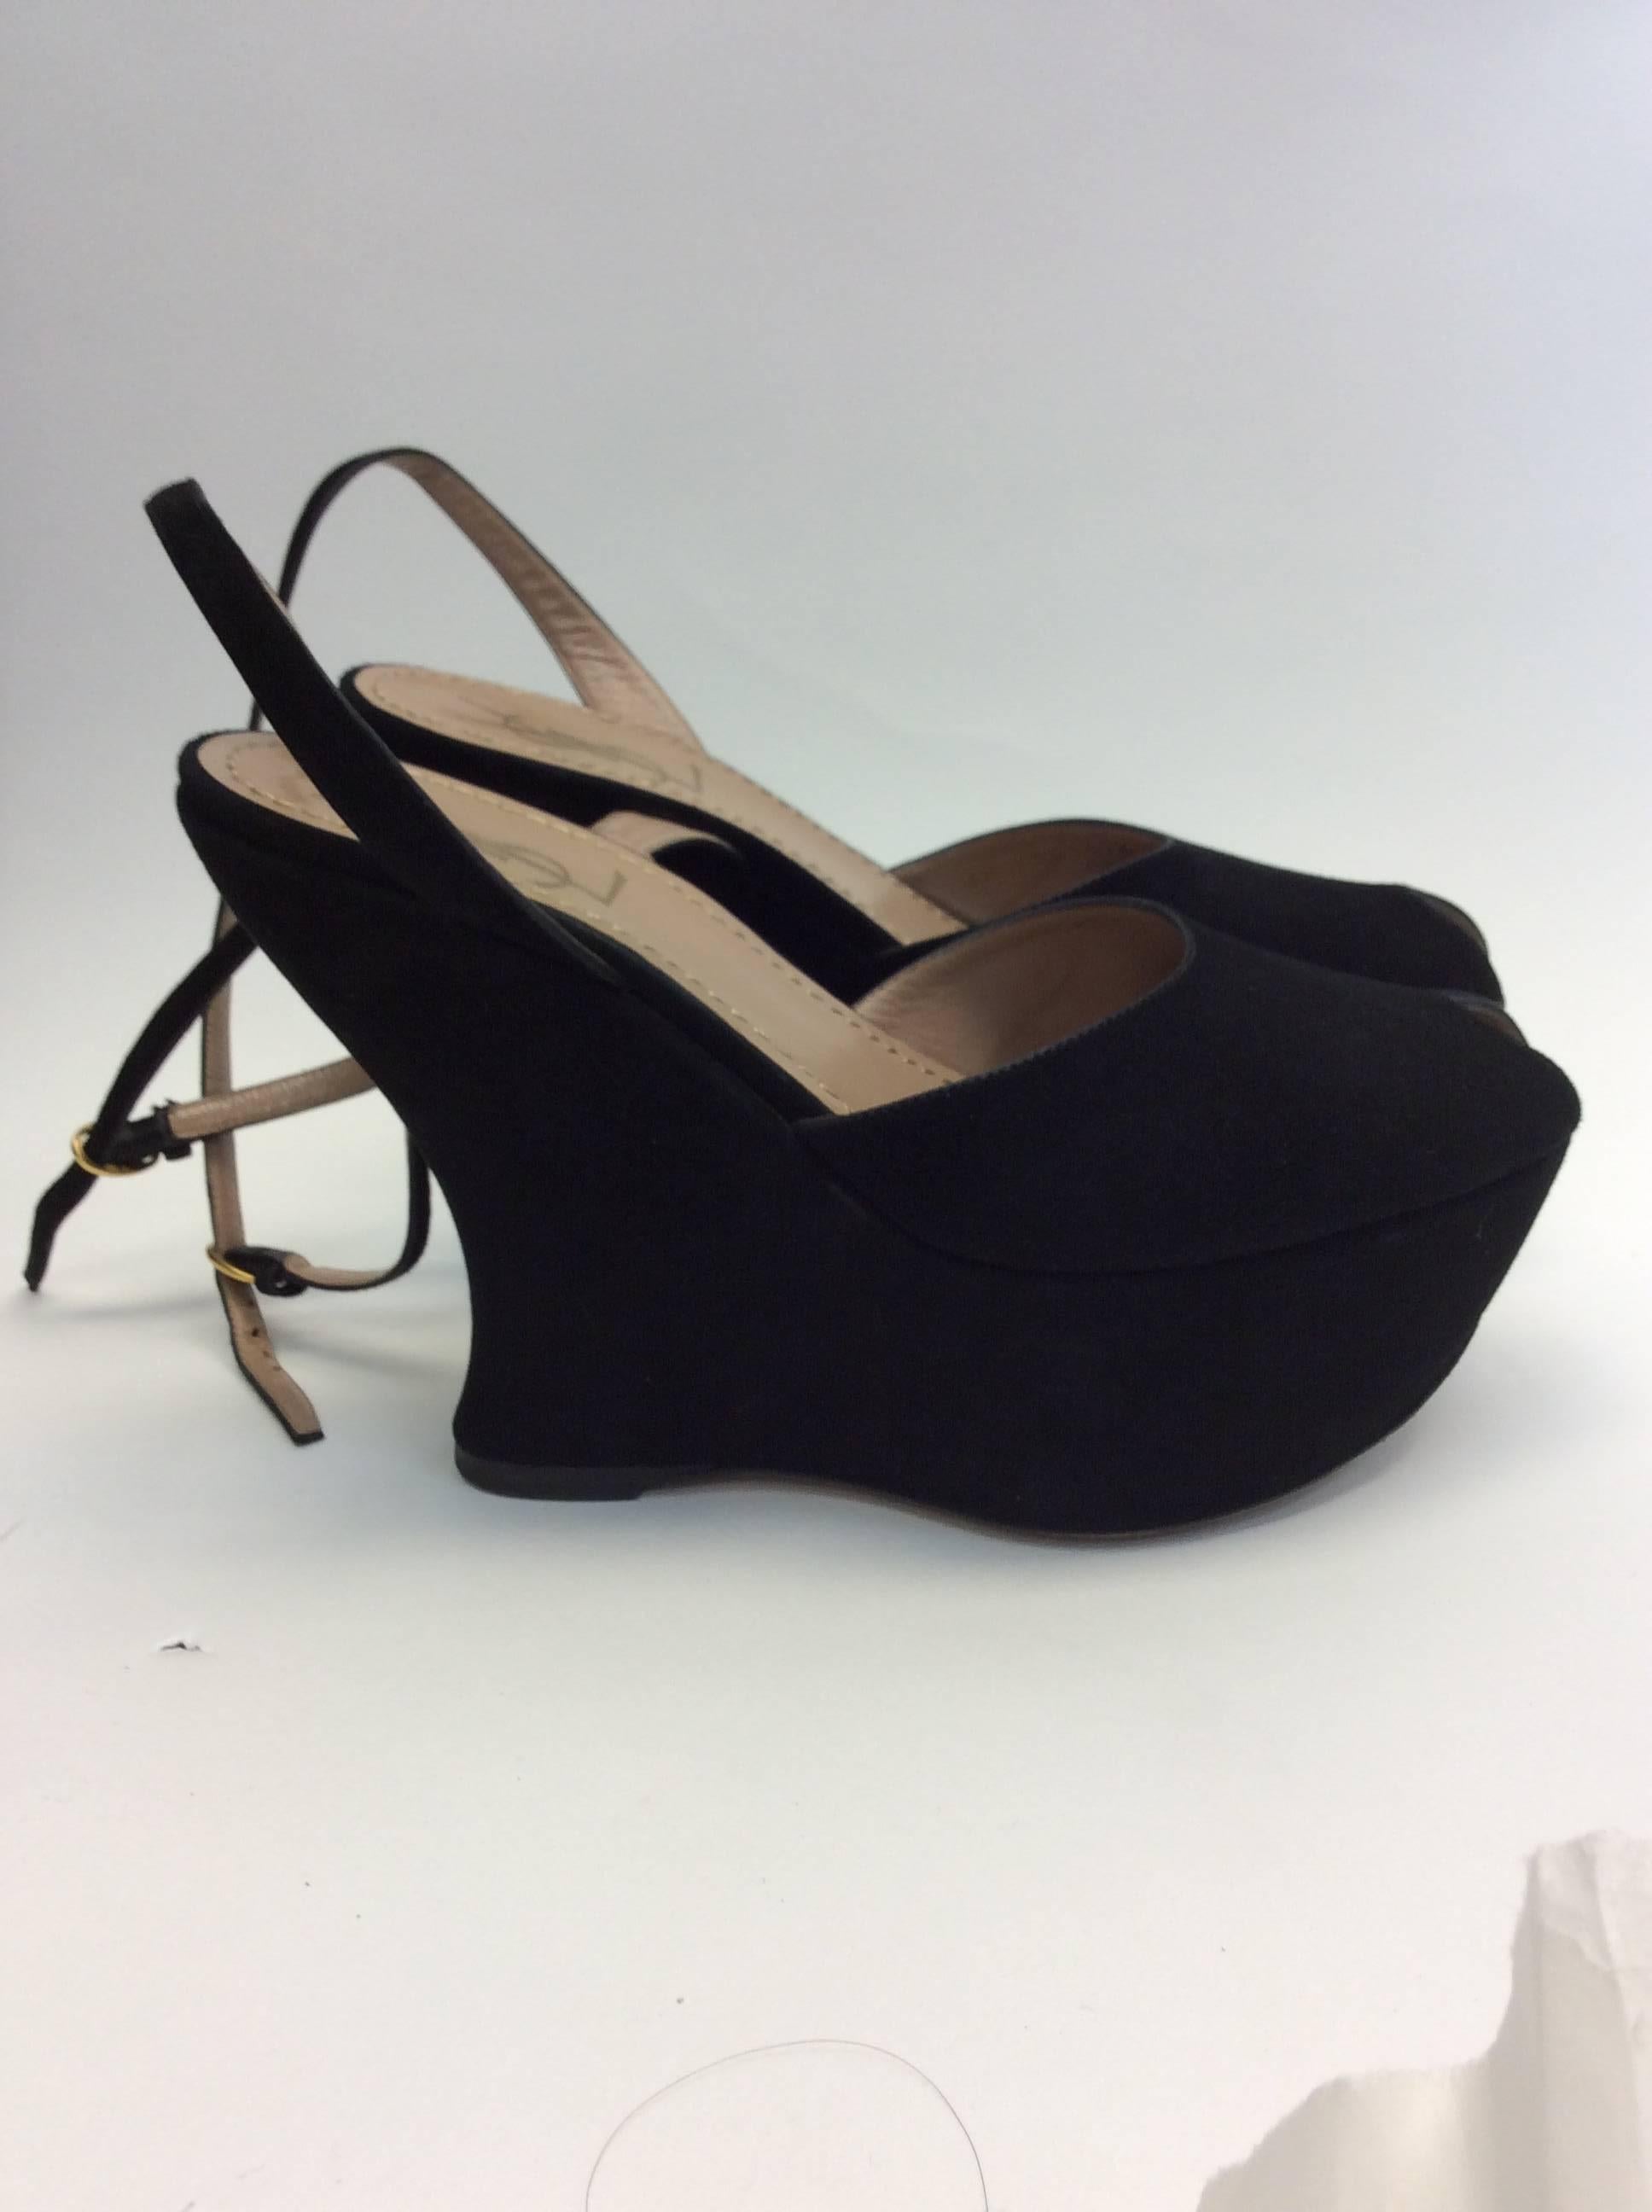 Yves Saint Laurent Suede Wedge
$299
Size 37
Made in Italy
5 inch heel with ankle strap and peep toe